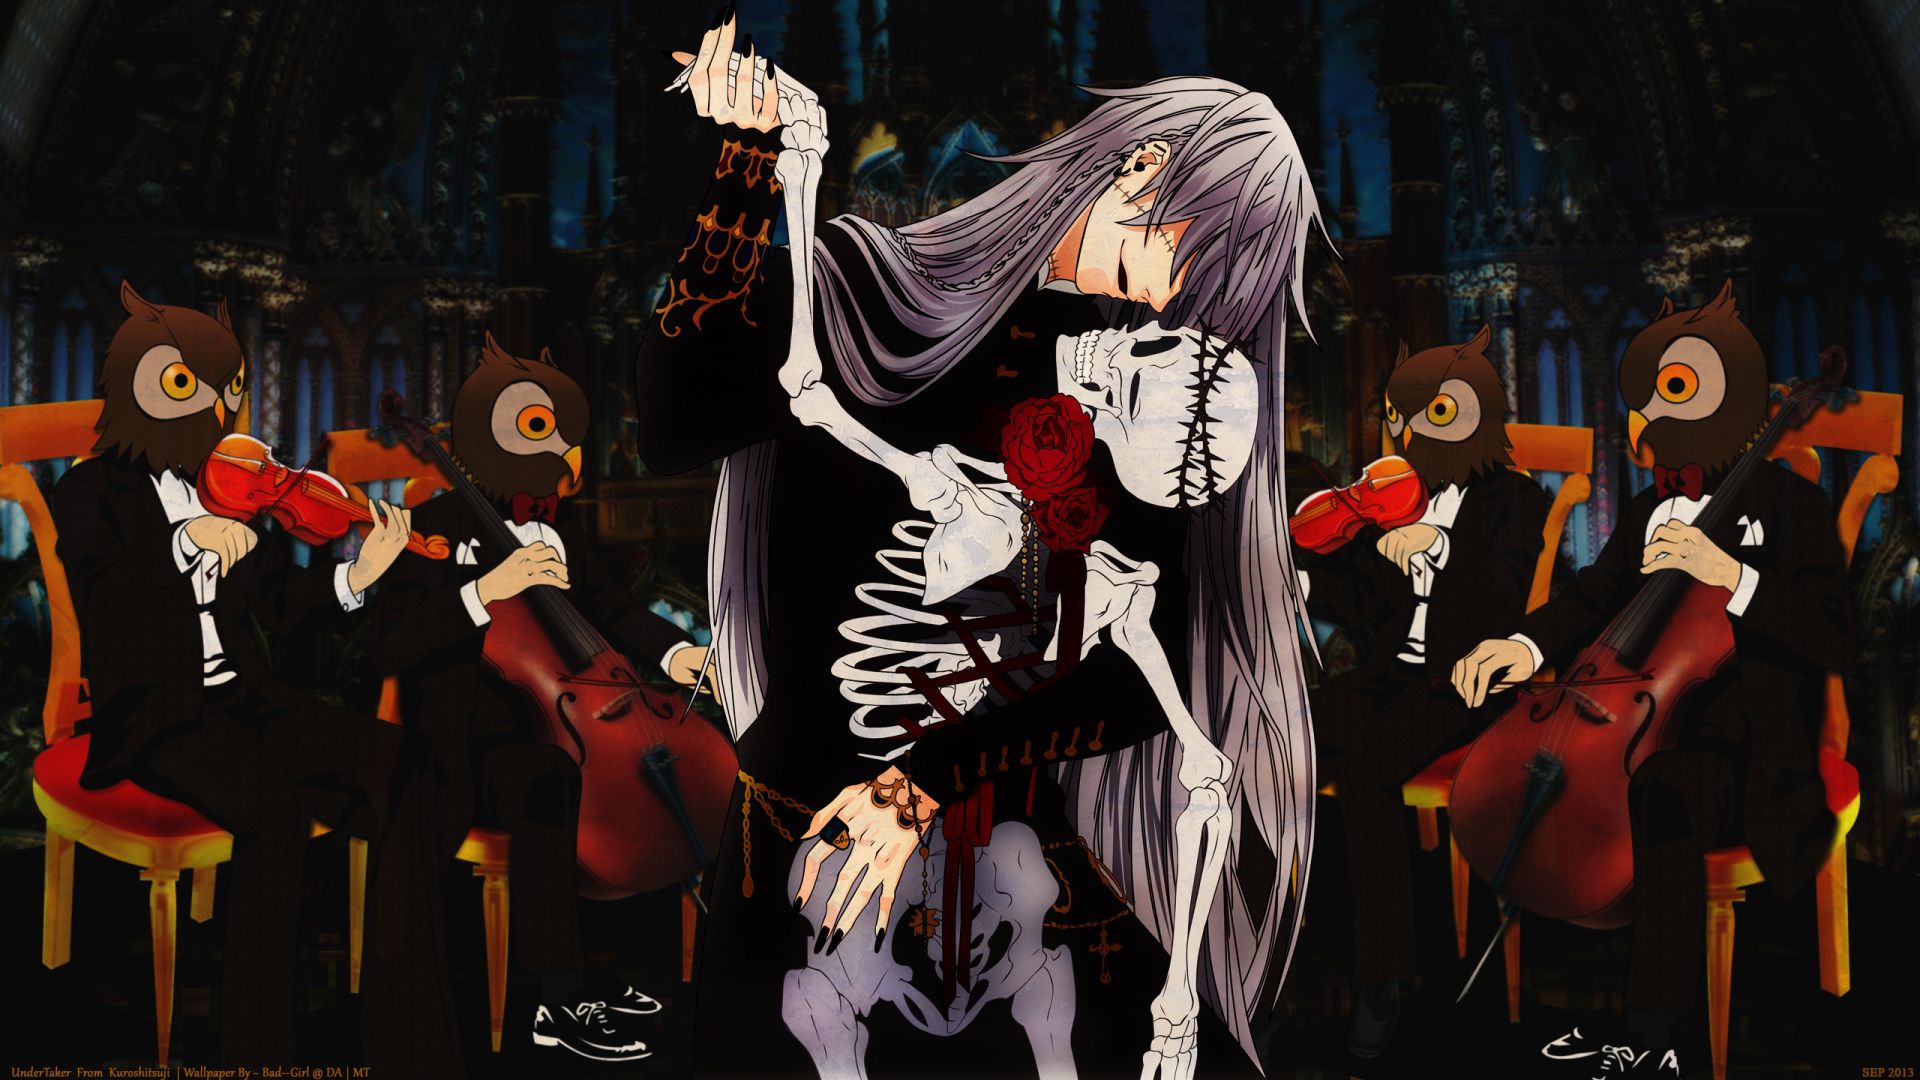 Dance with a skeleton in the anime Black Butler Desktop wallpapers